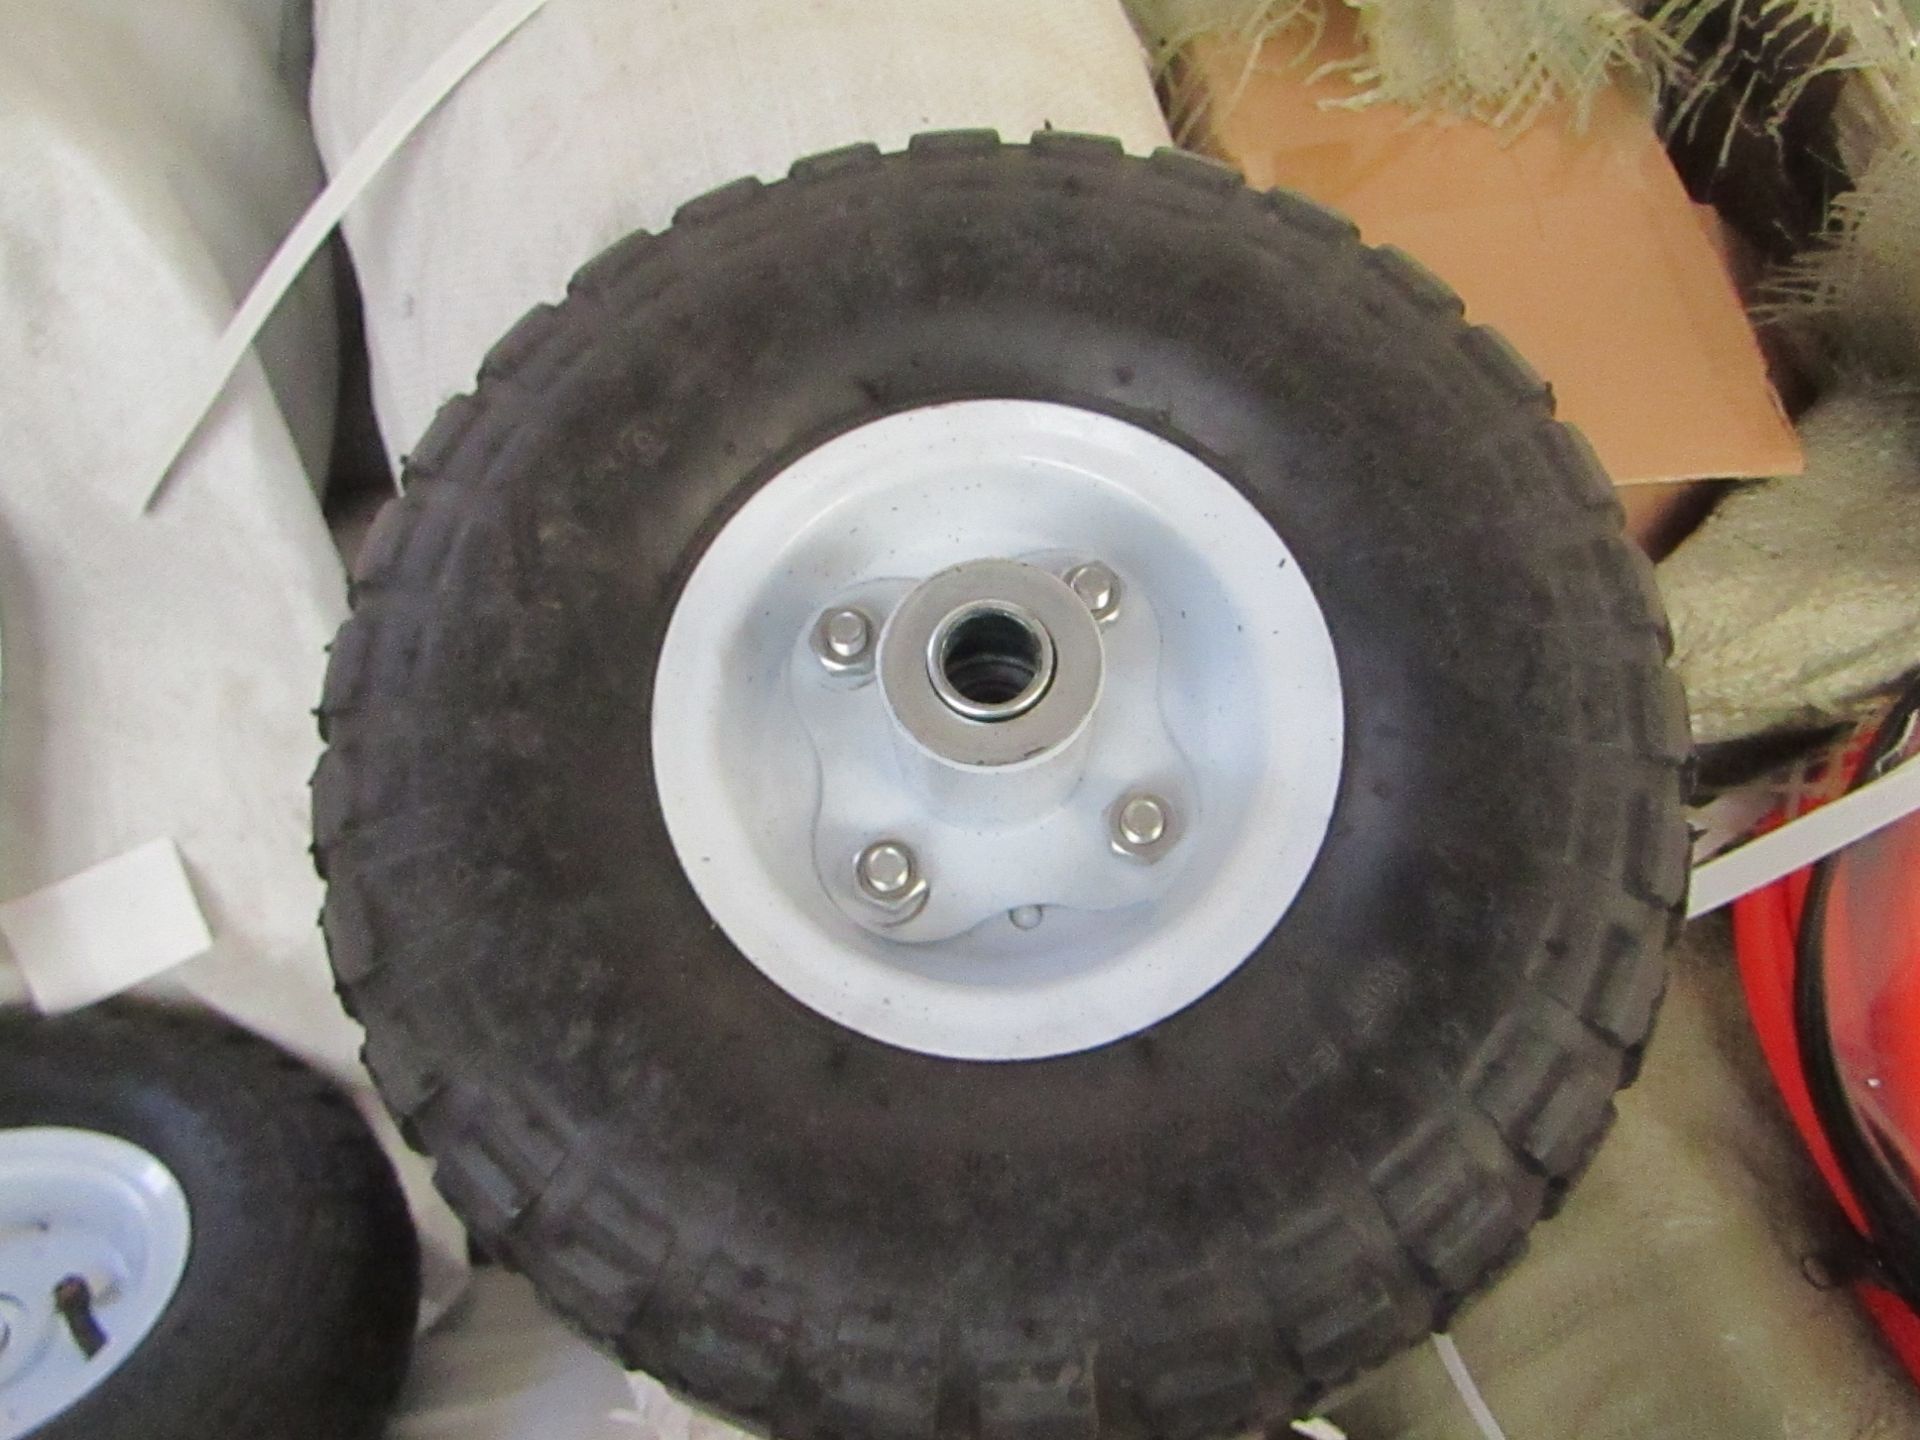 Replacement sack truck wheels, new